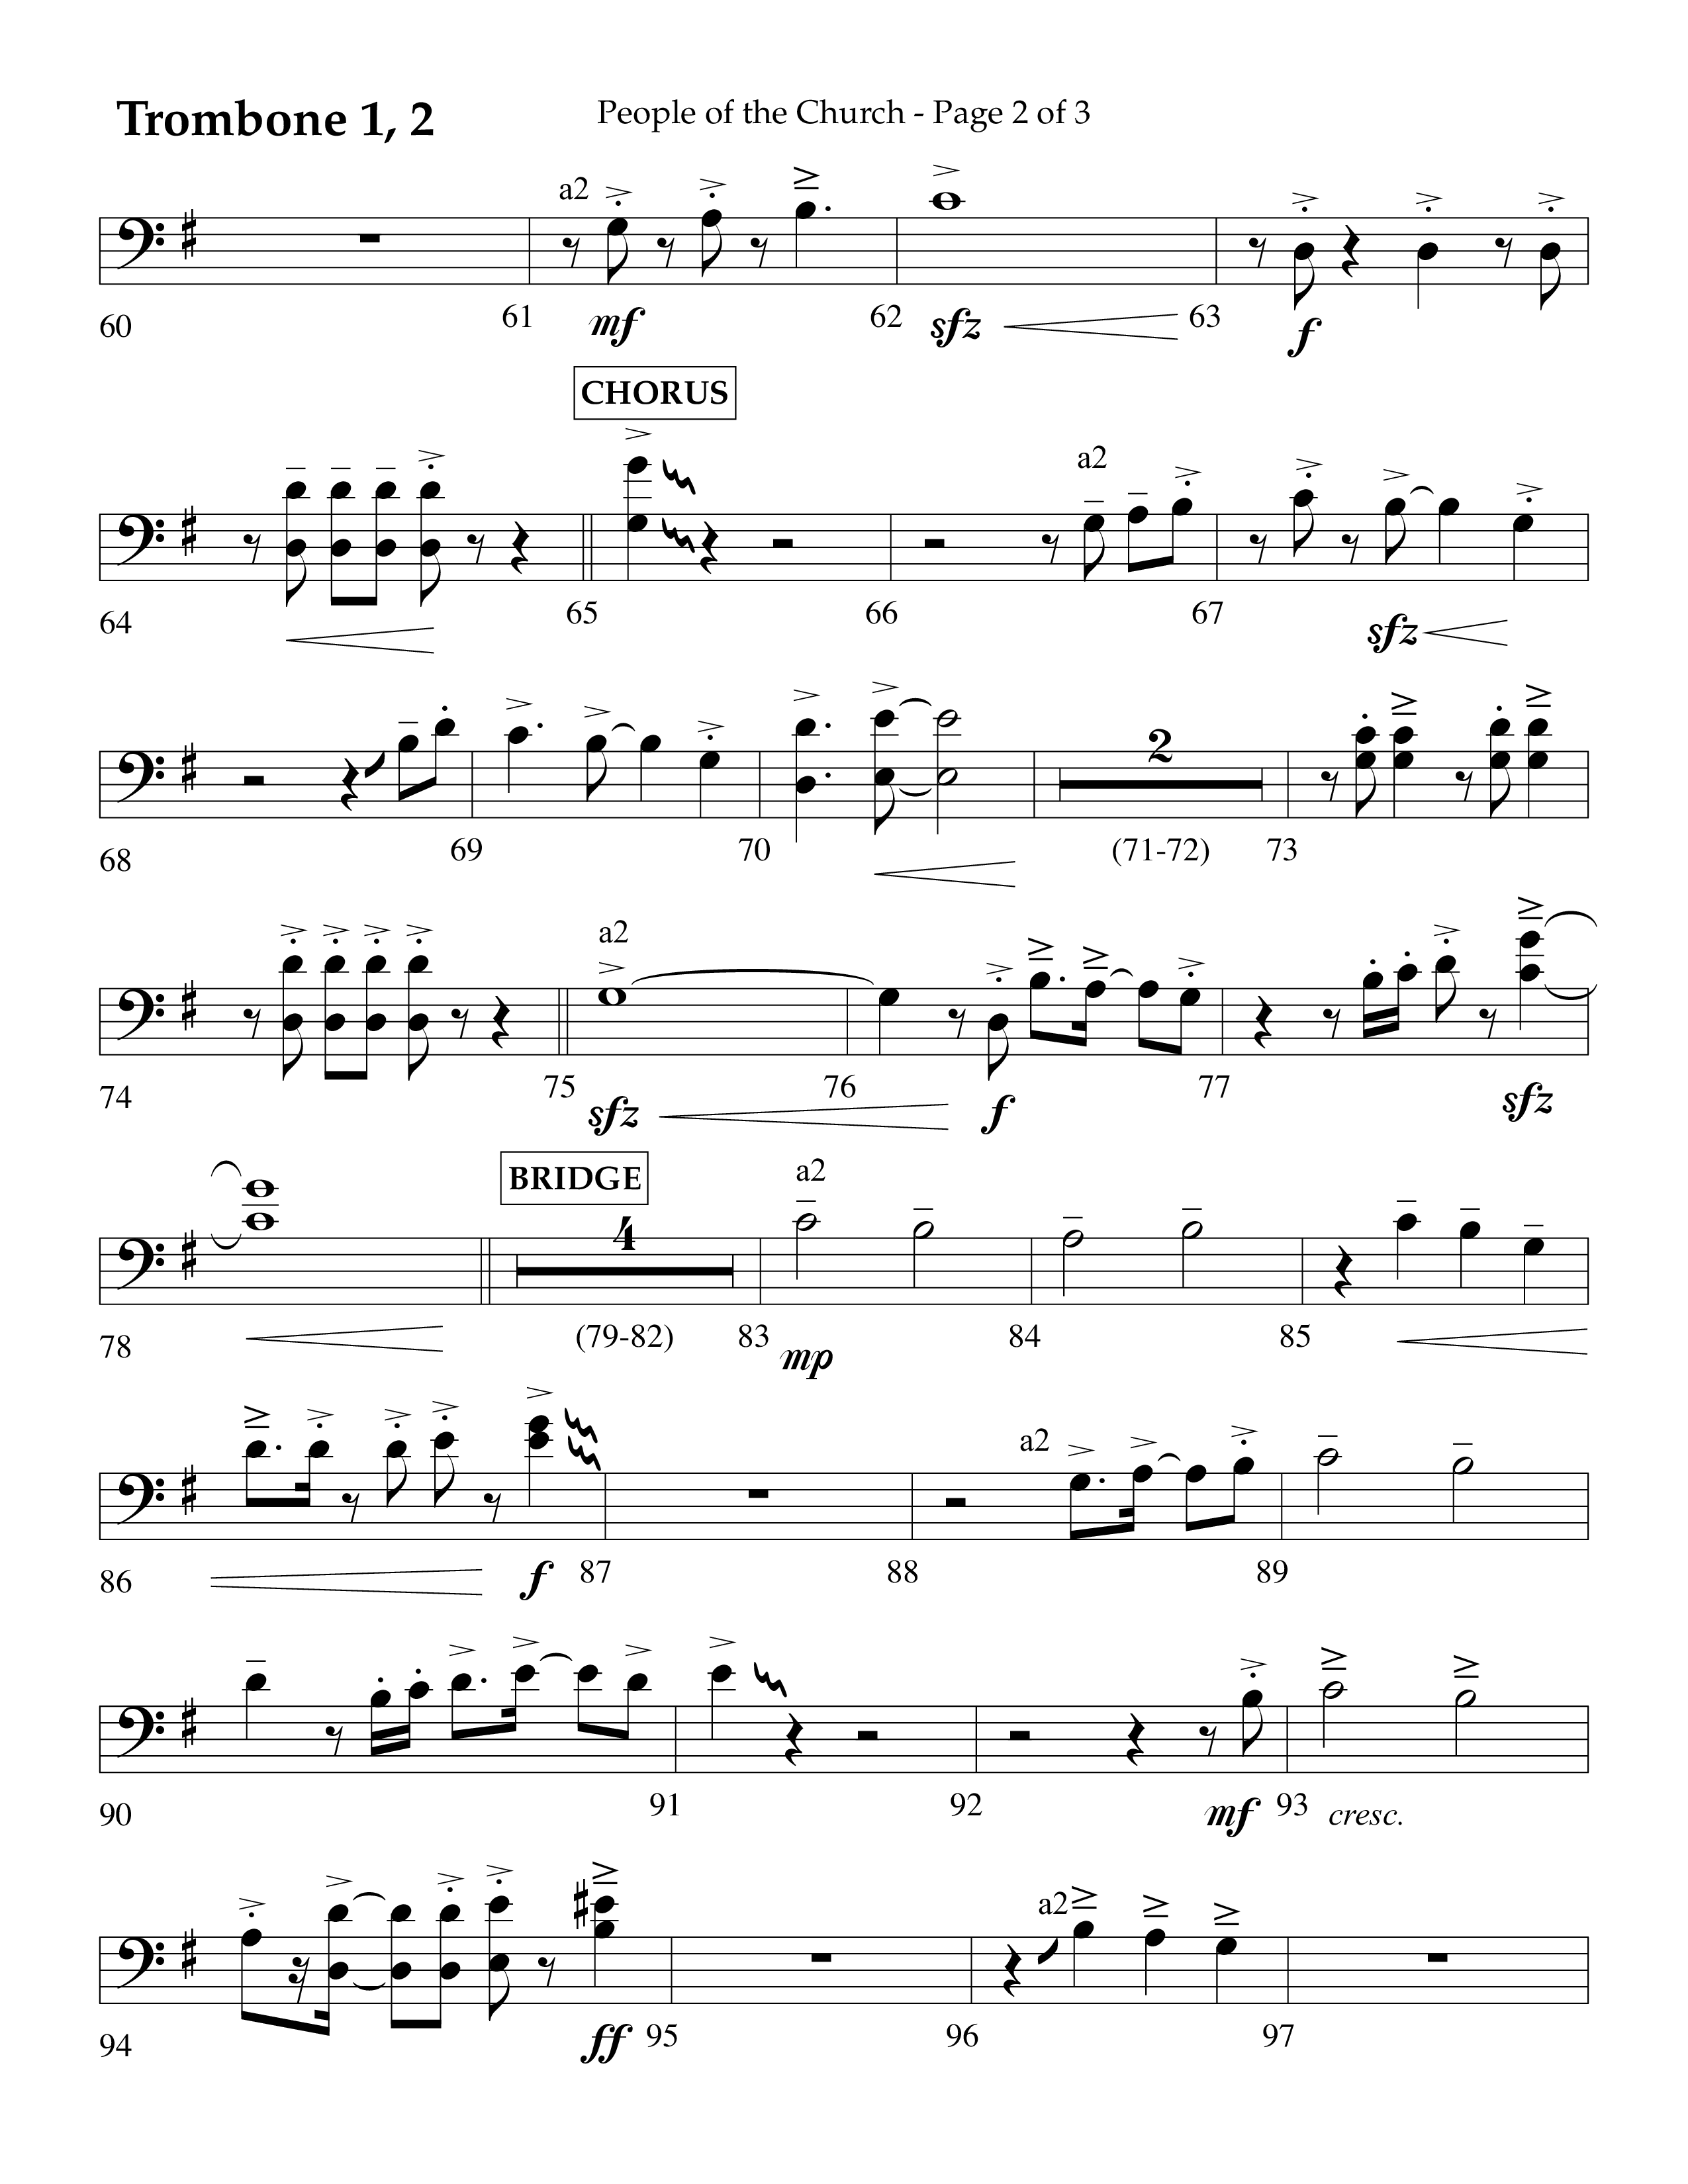 People Of The church (Choral Anthem SATB) Trombone 1/2 (Lifeway Choral / Arr. Eric Belvin / Arr. John Bolin / Arr. Don Koch / Orch. Danny Mitchell)